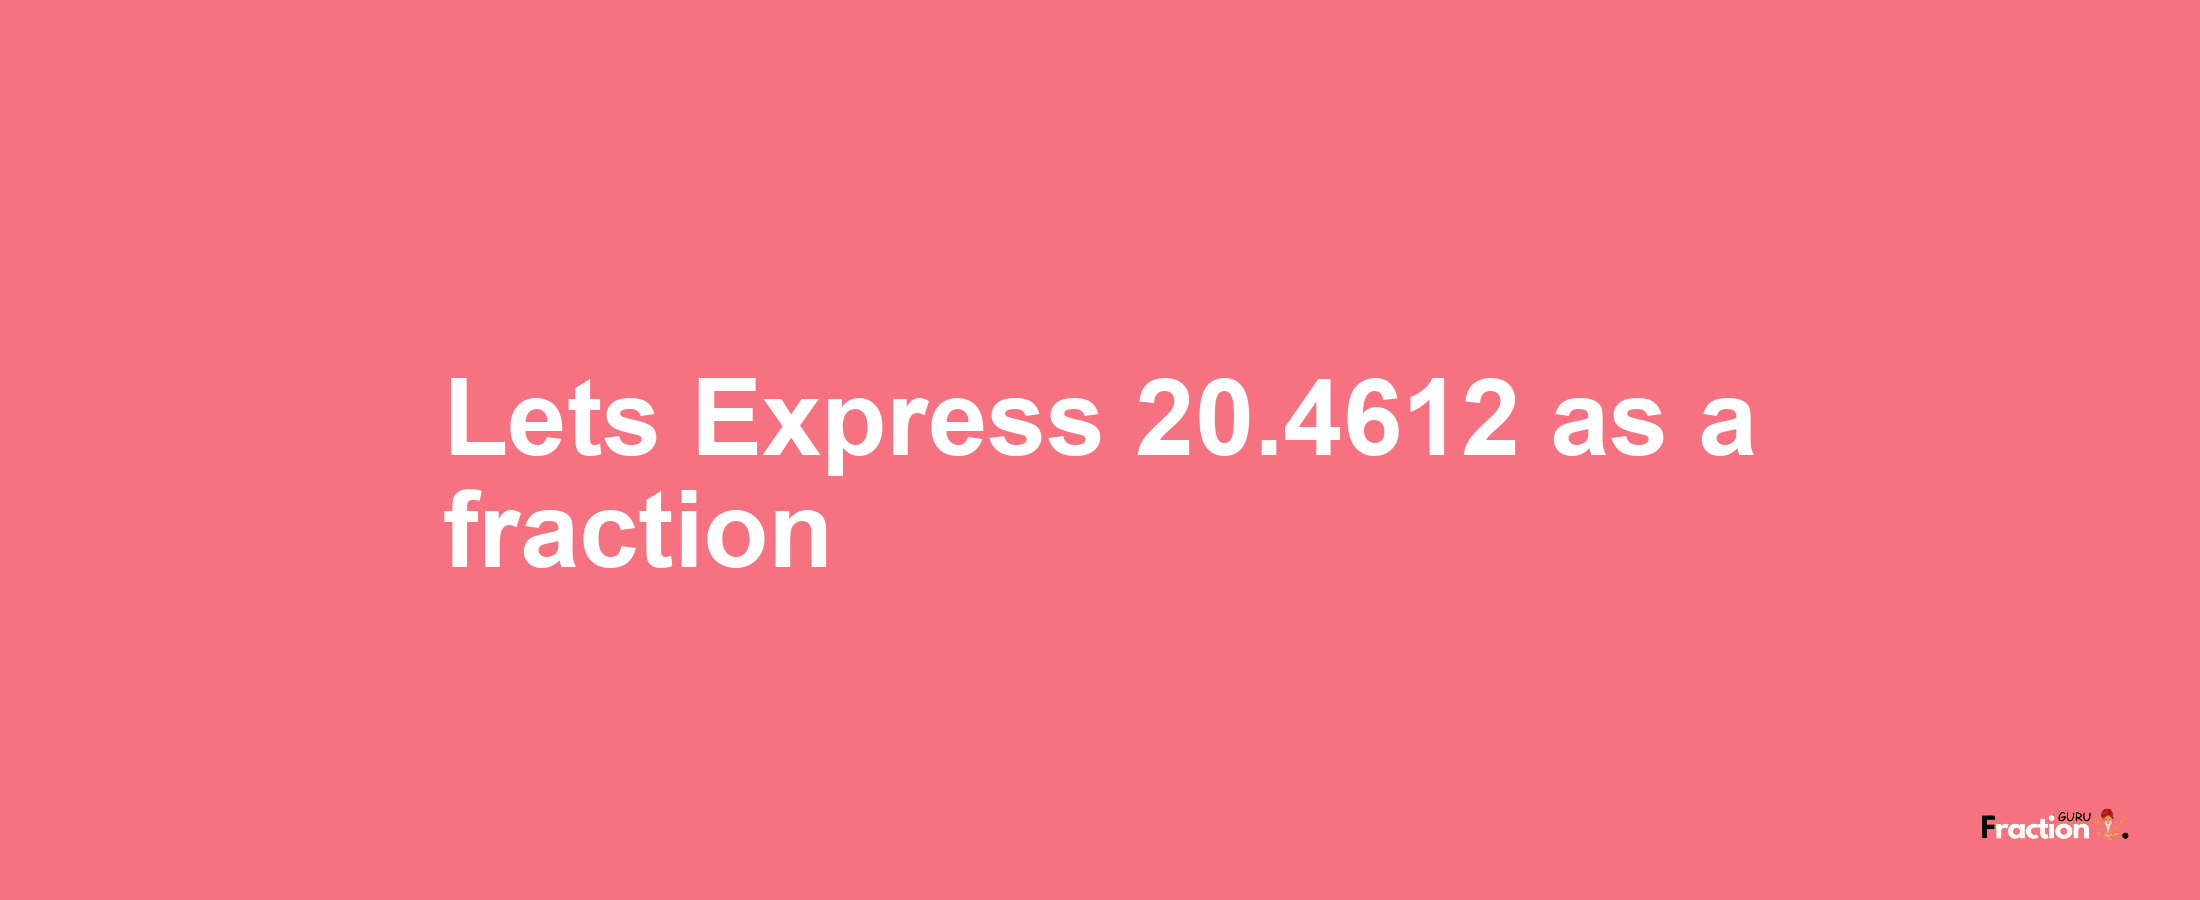 Lets Express 20.4612 as afraction